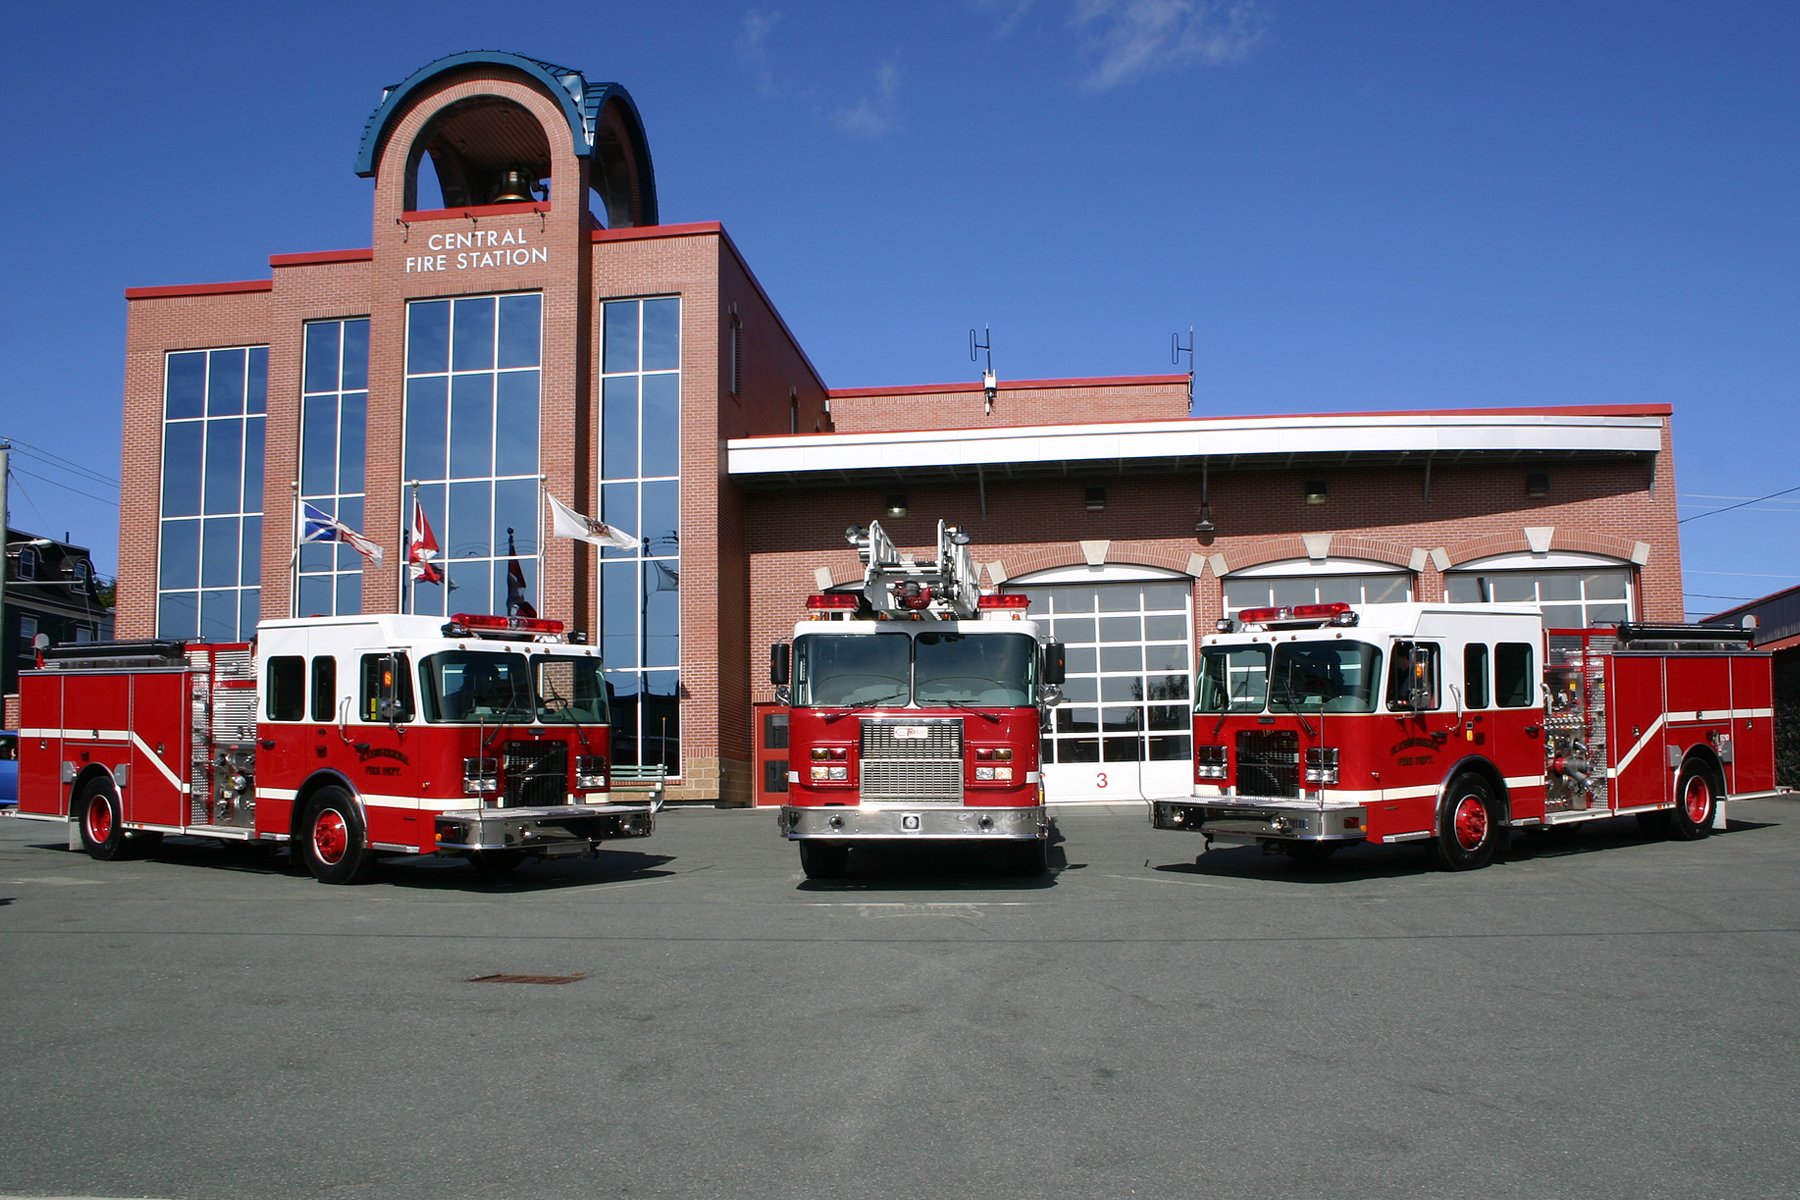 Photo of Central Fire Station, Harvey Road with three fire trucks in front of the building